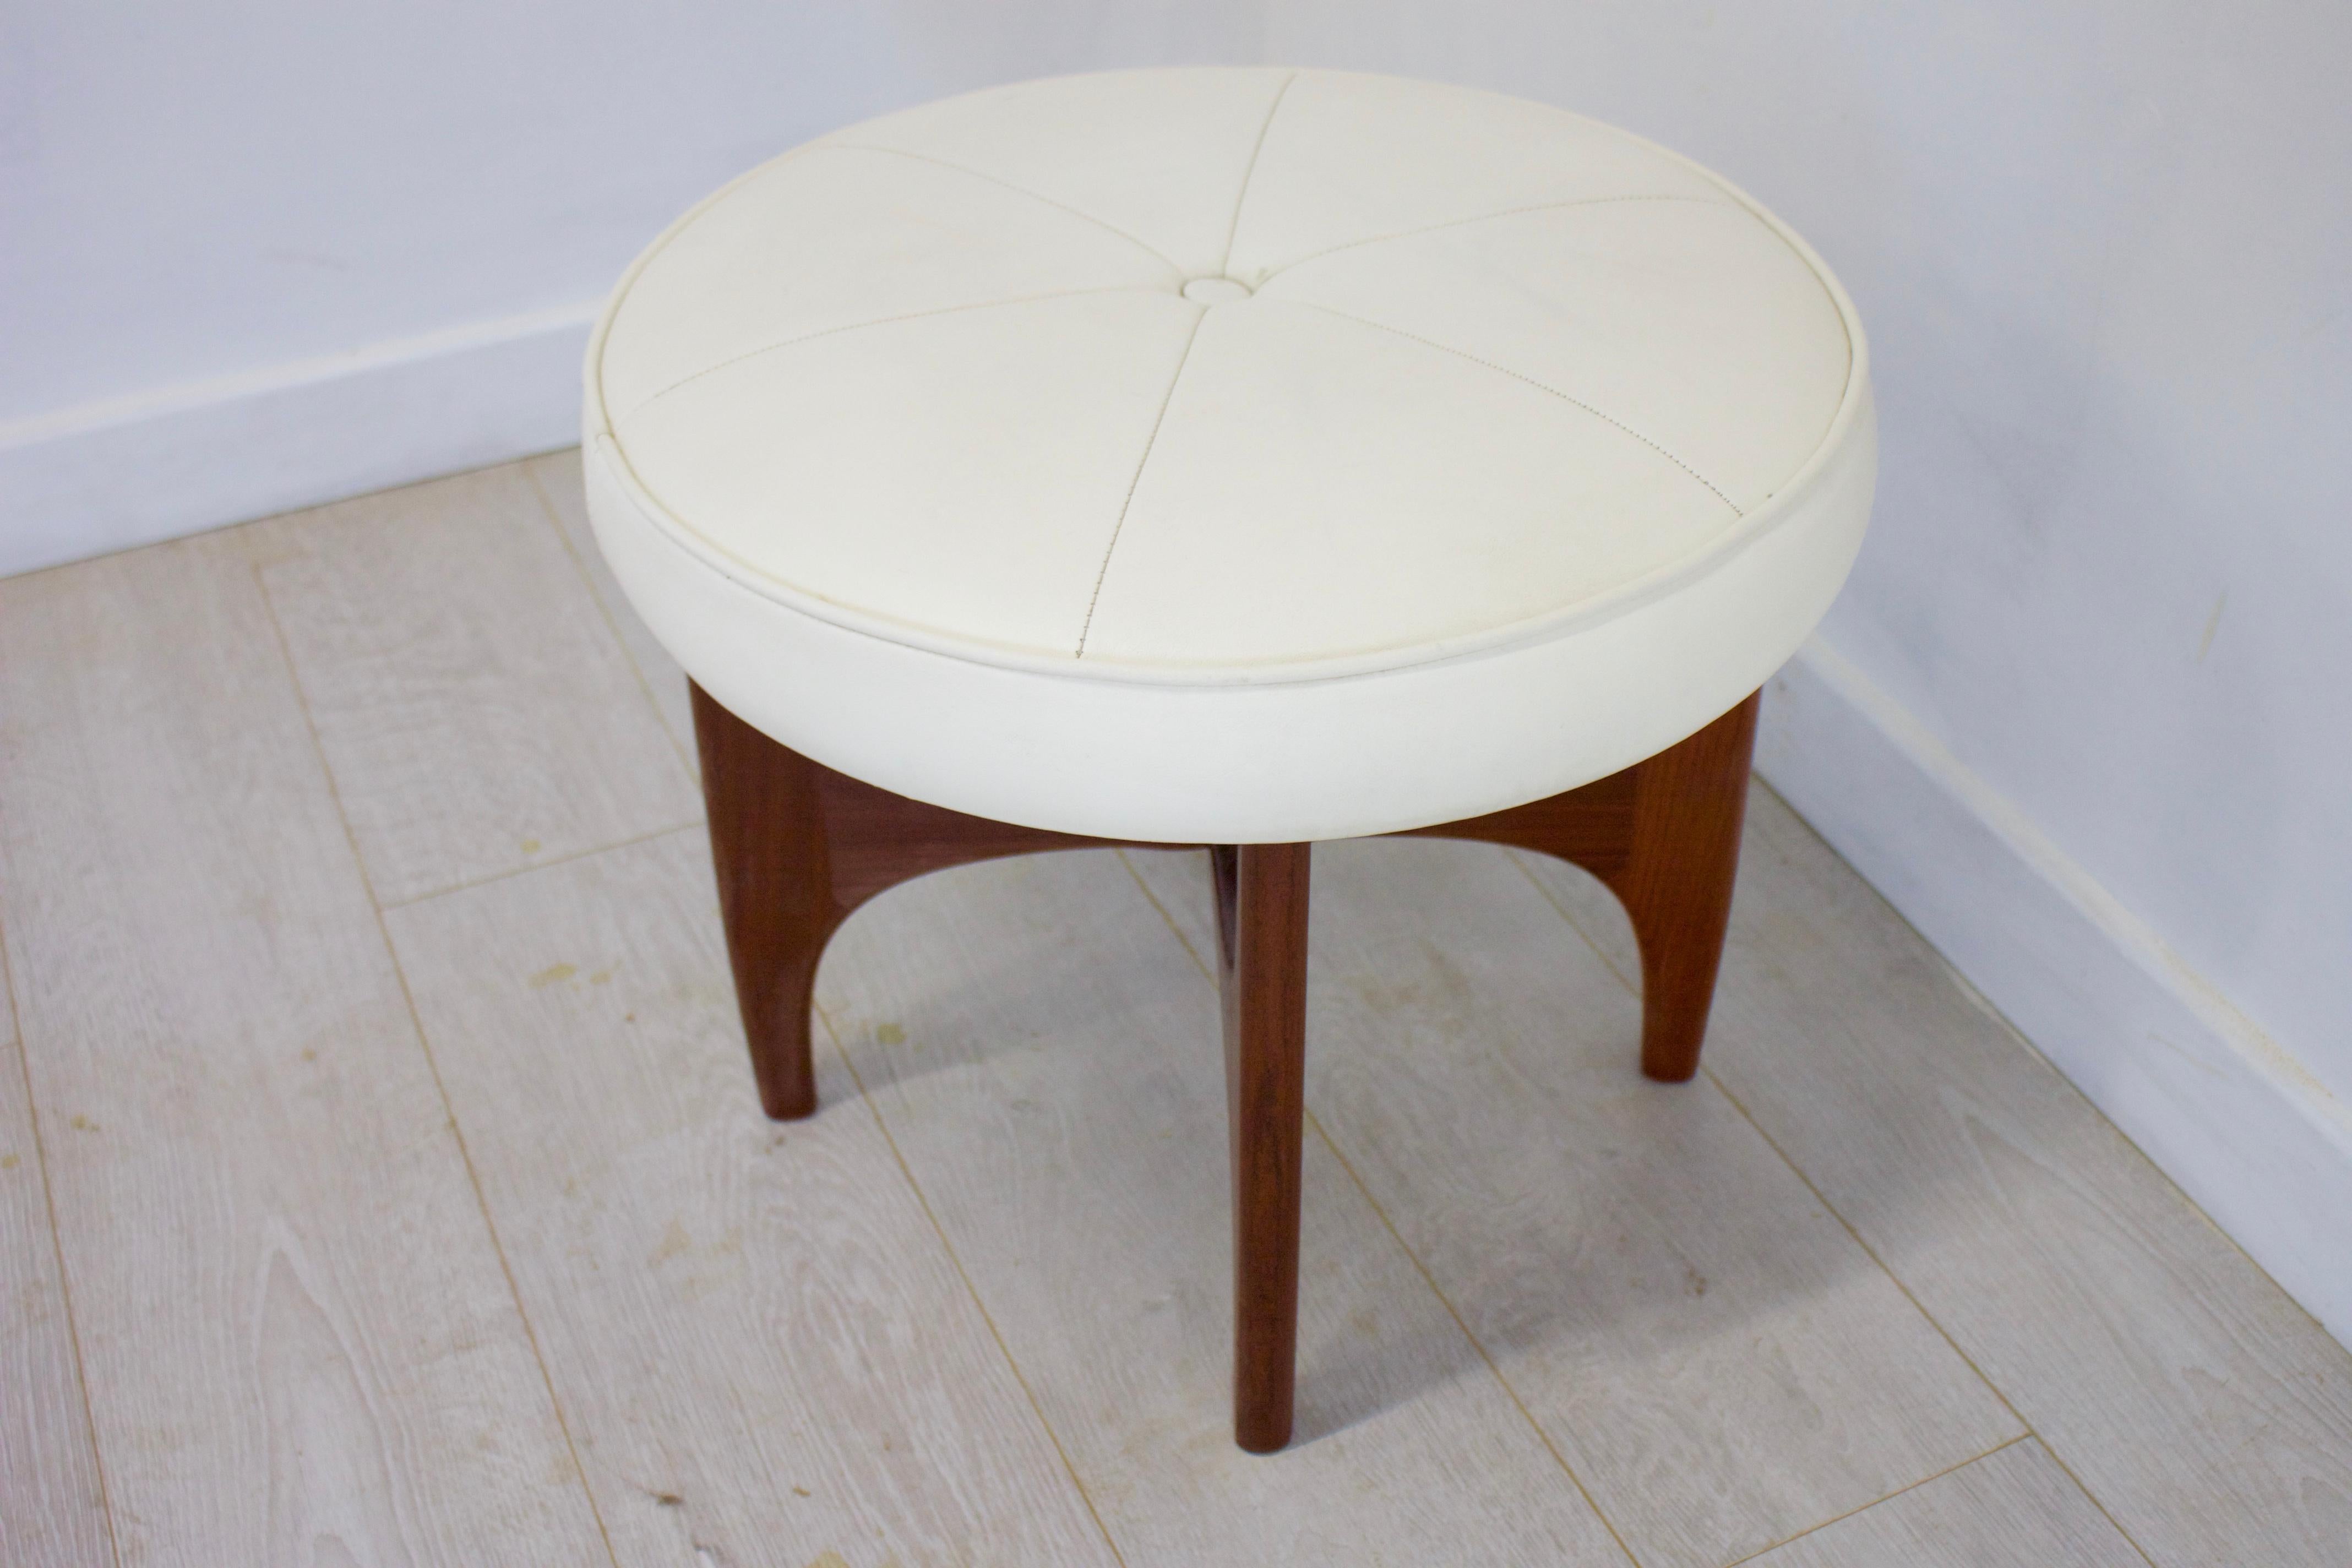 - Midcentury dressing table stool
- Made in the UK by G Plan
- Made from teak and white vinyl.